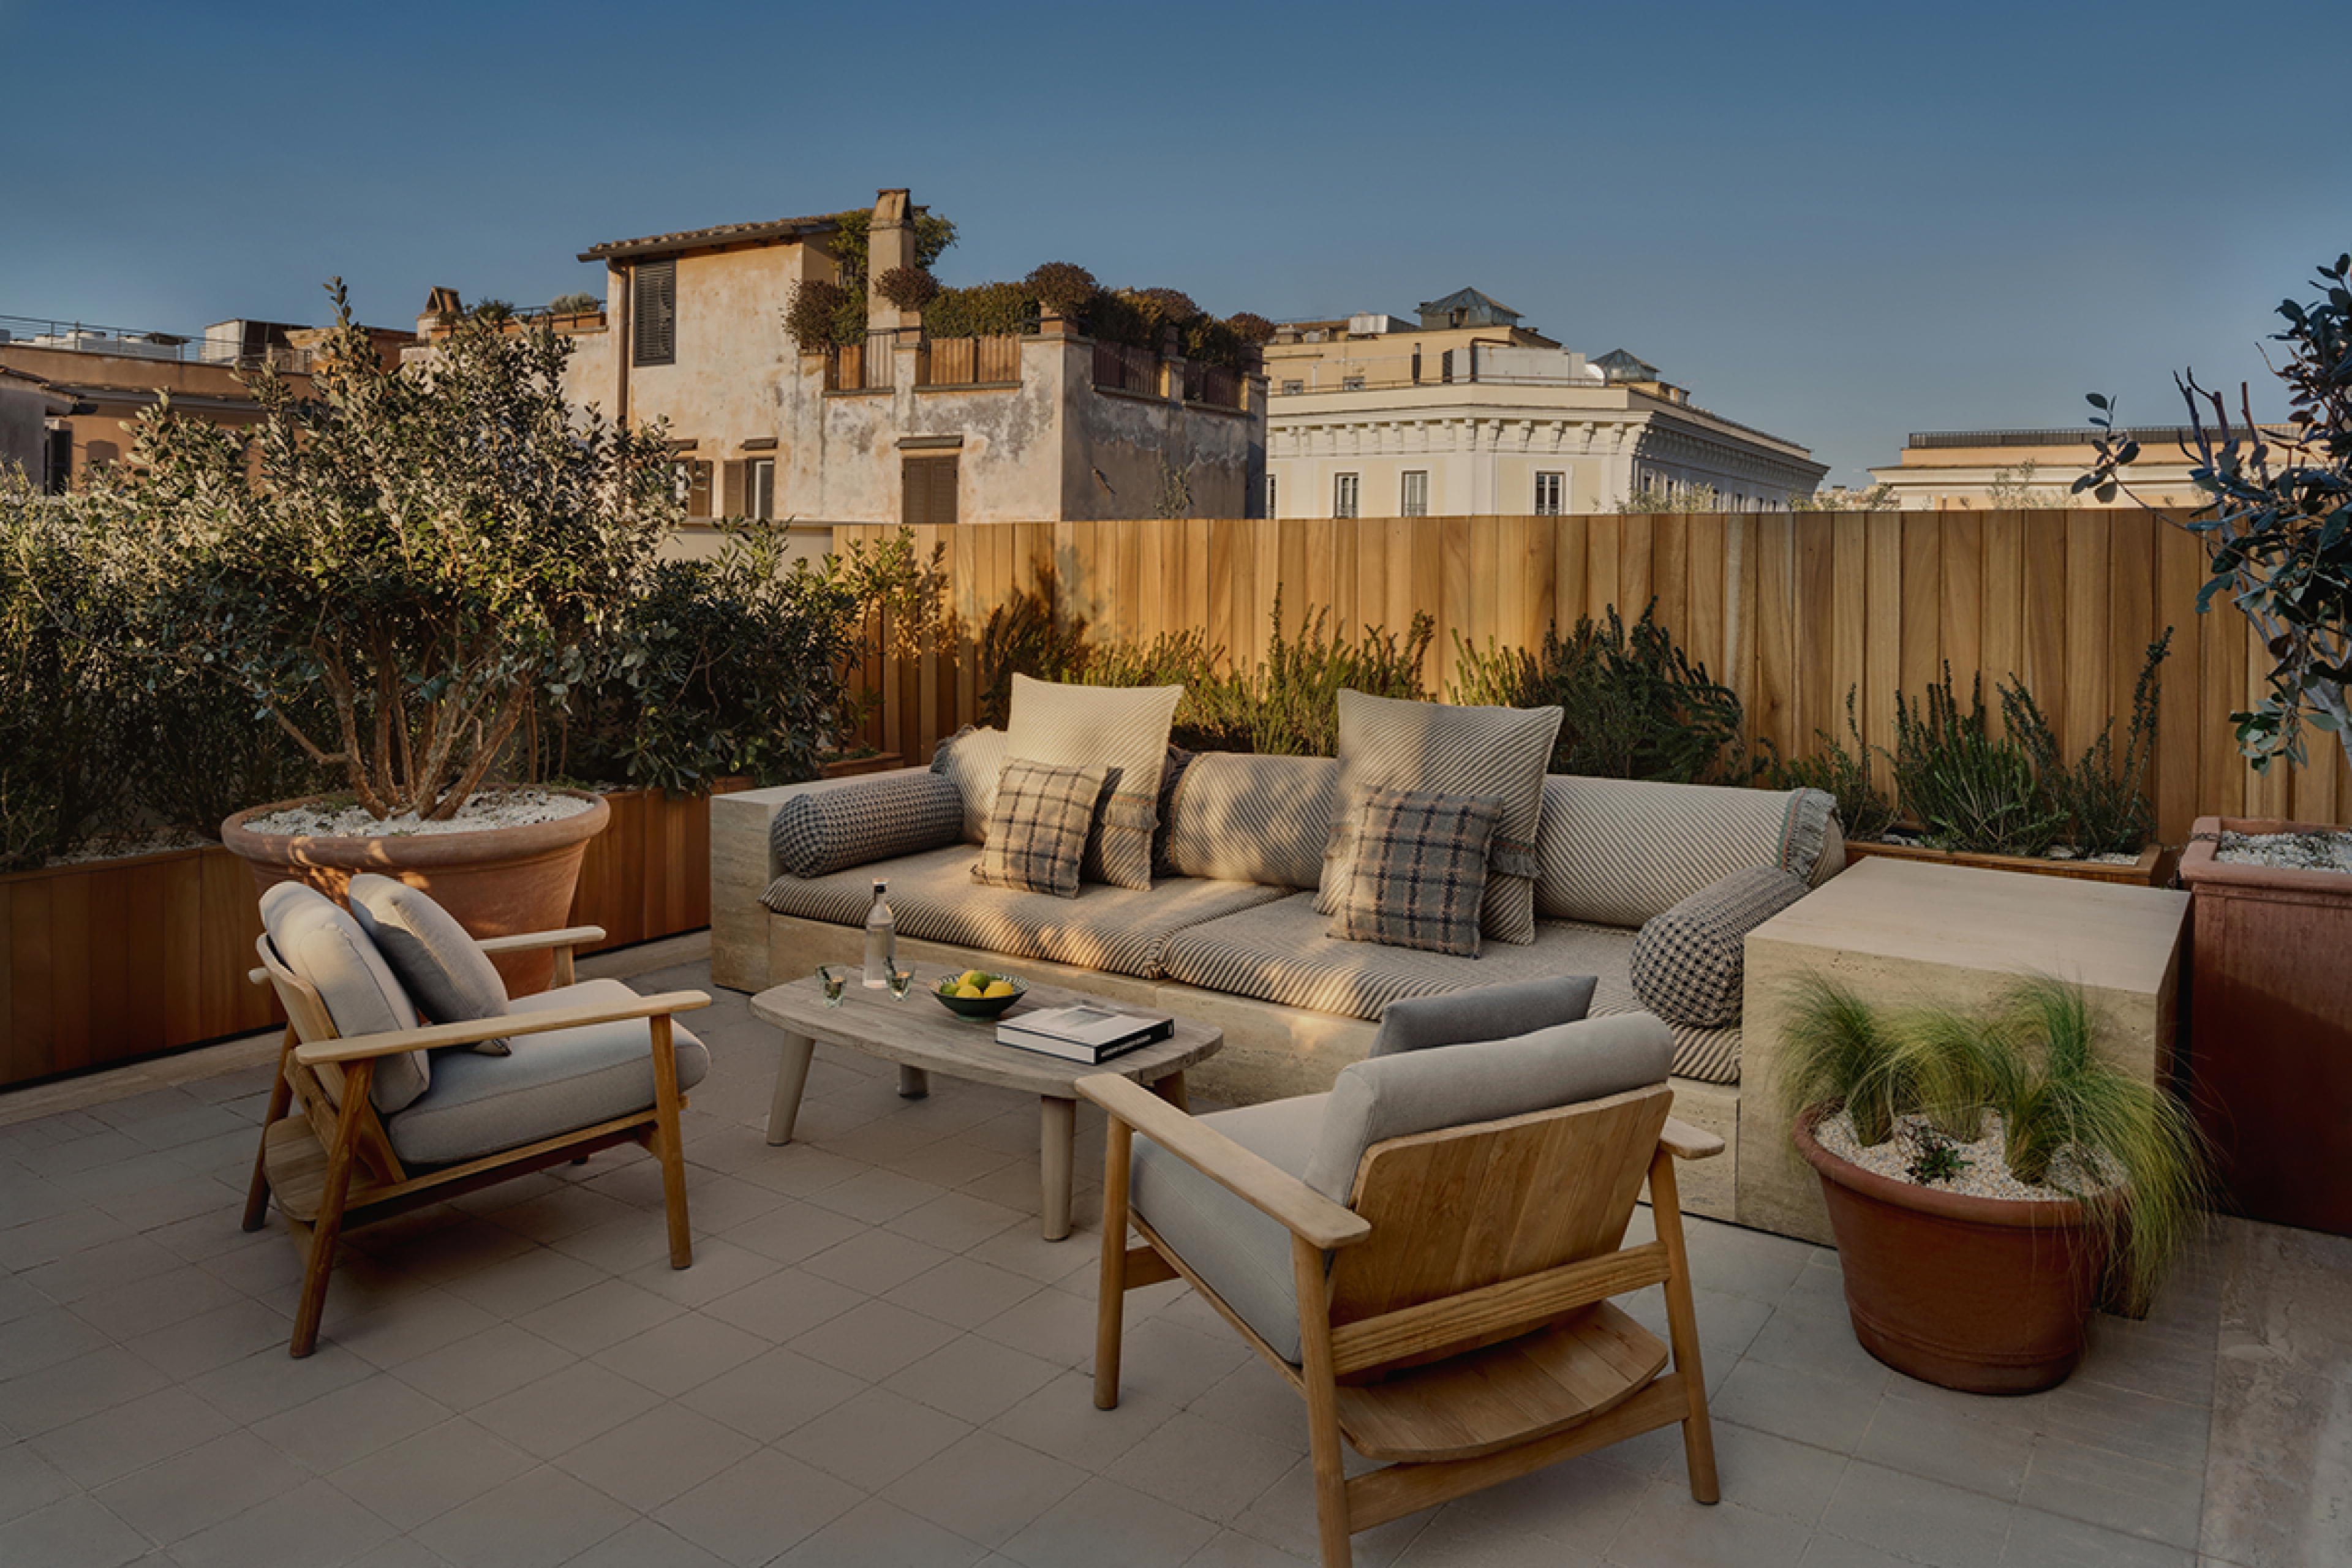 Terrace Suite overlooking Rome with a sofa and two chairs around a coffee table